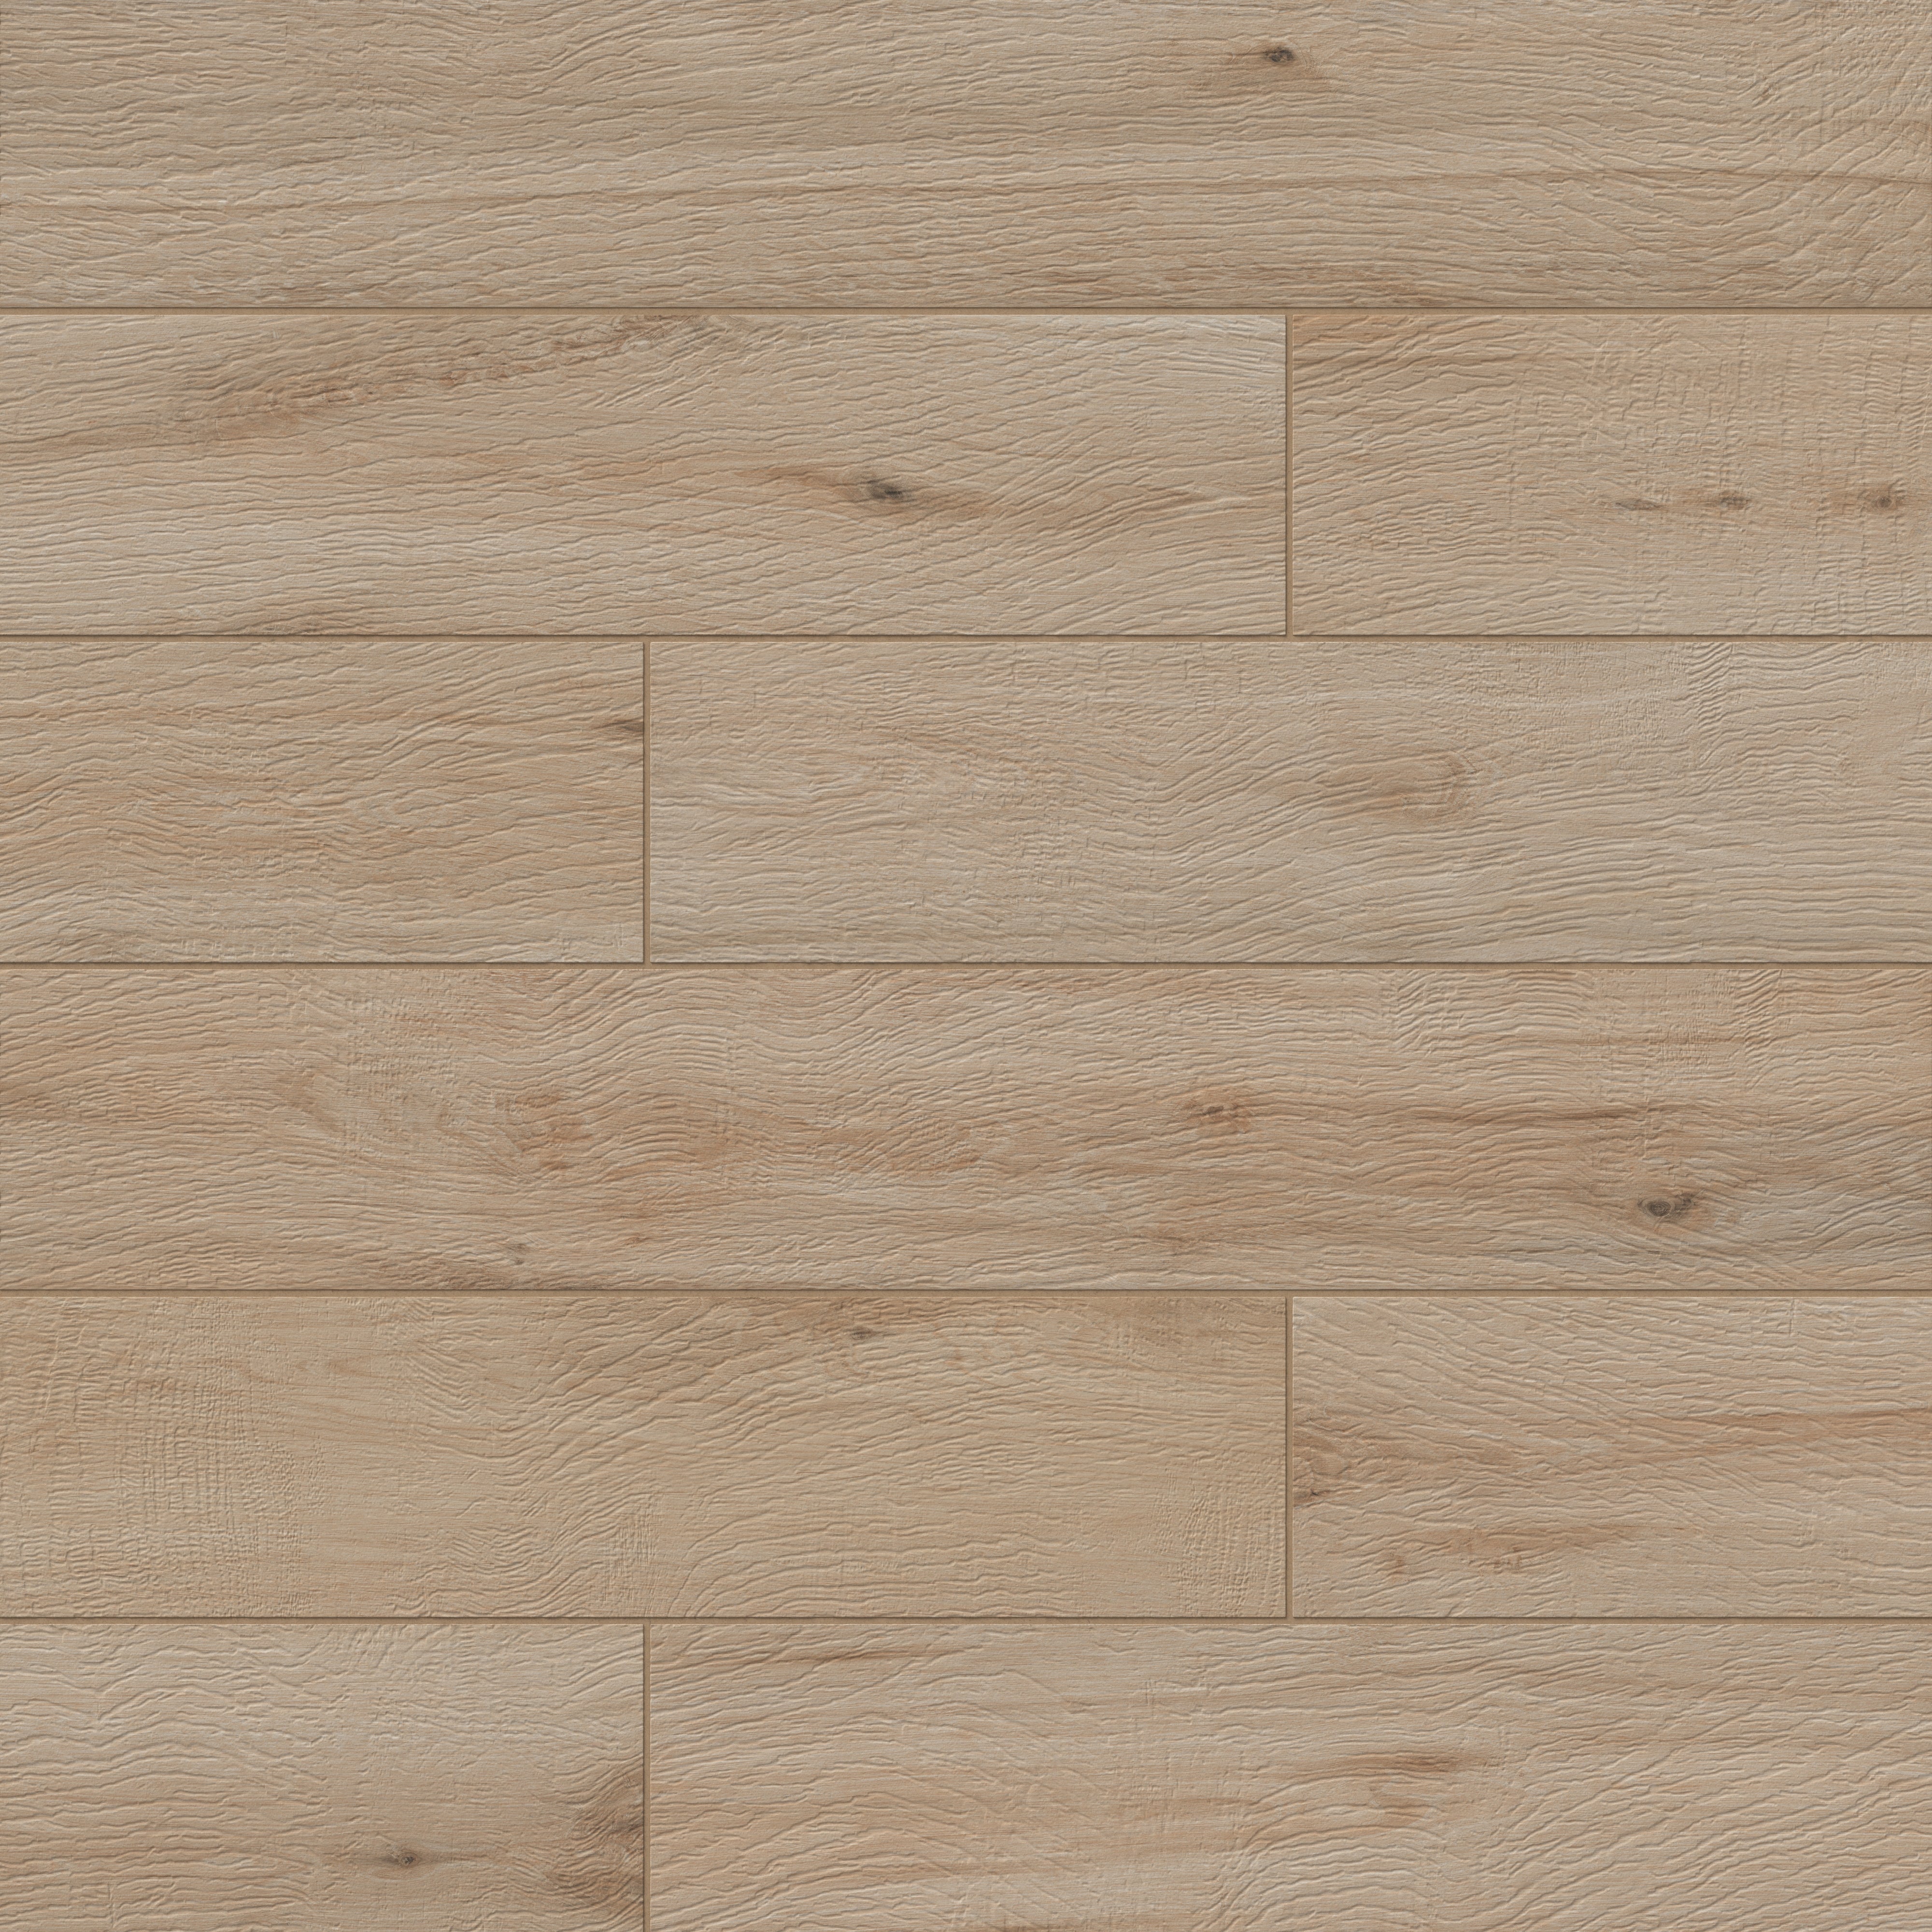 etailed perspective of Preston's wood-inspired porcelain plank in the light Birch tone, showcasing its natural elegance.